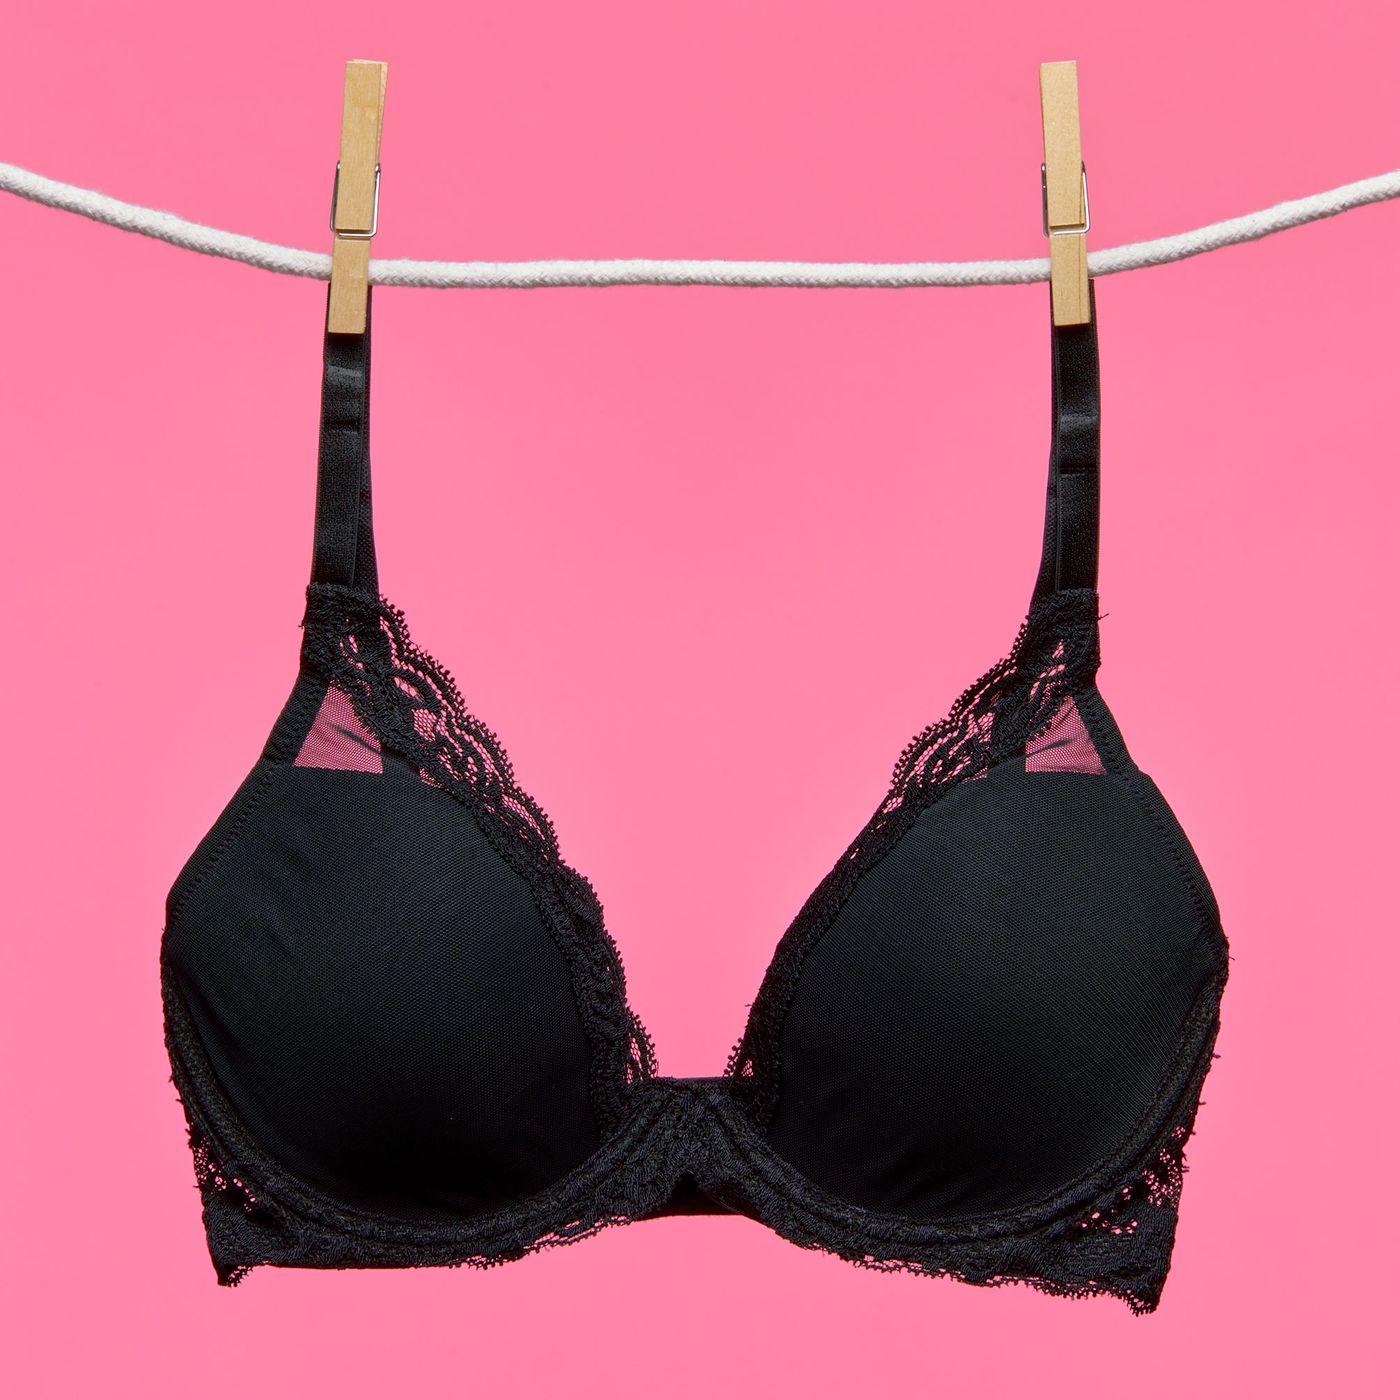 Lingerie terminology: A glossary